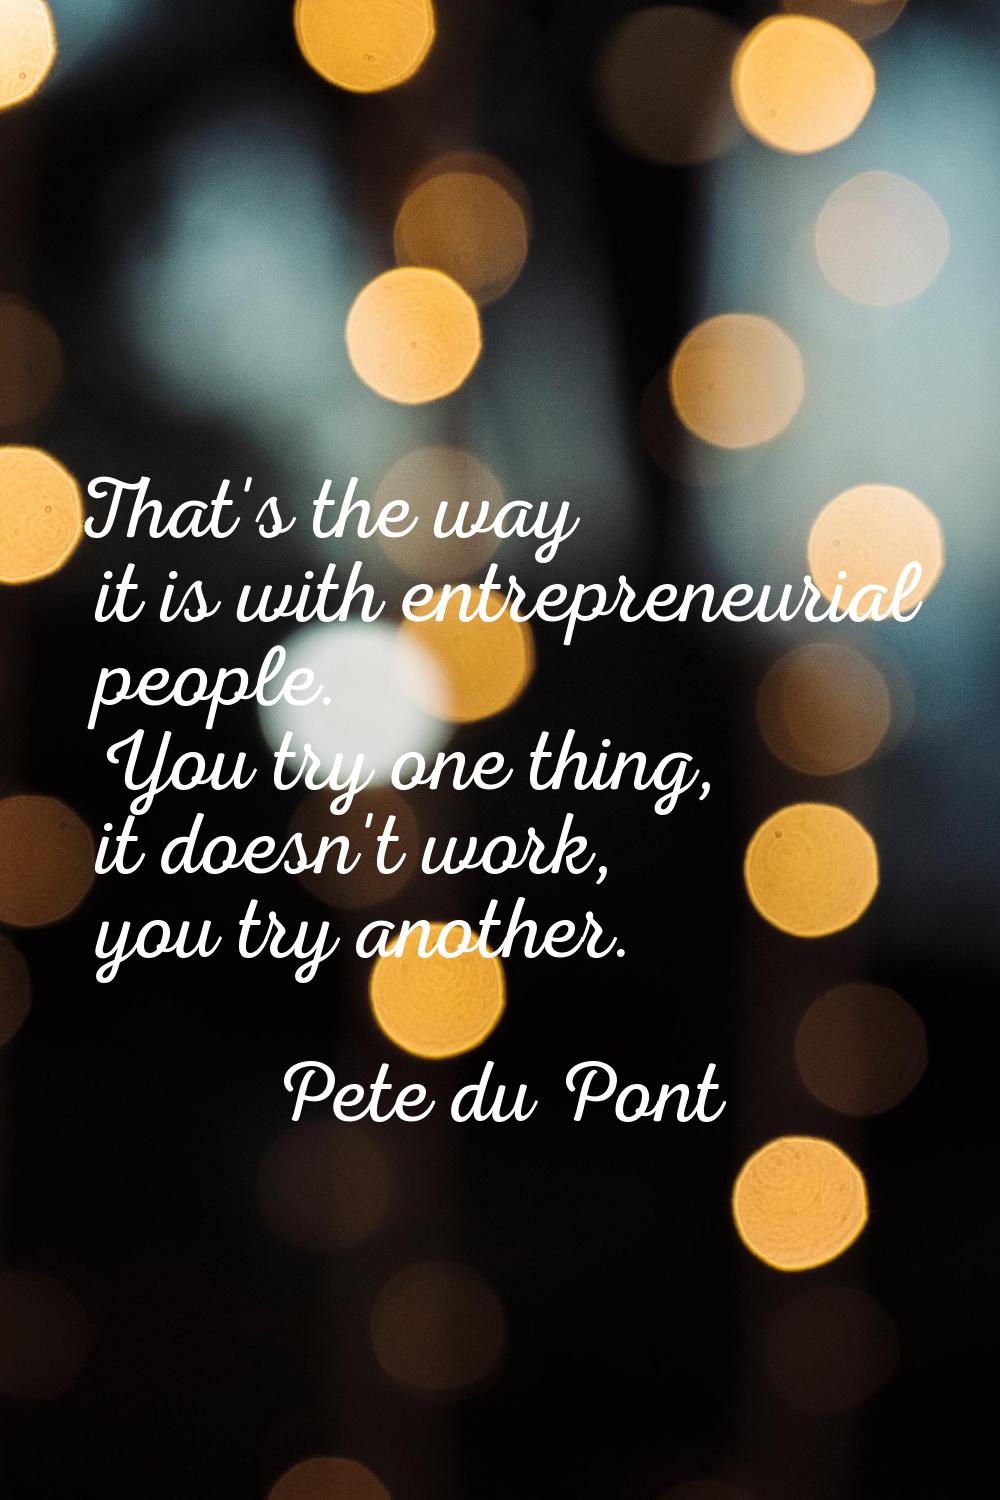 That's the way it is with entrepreneurial people. You try one thing, it doesn't work, you try anoth